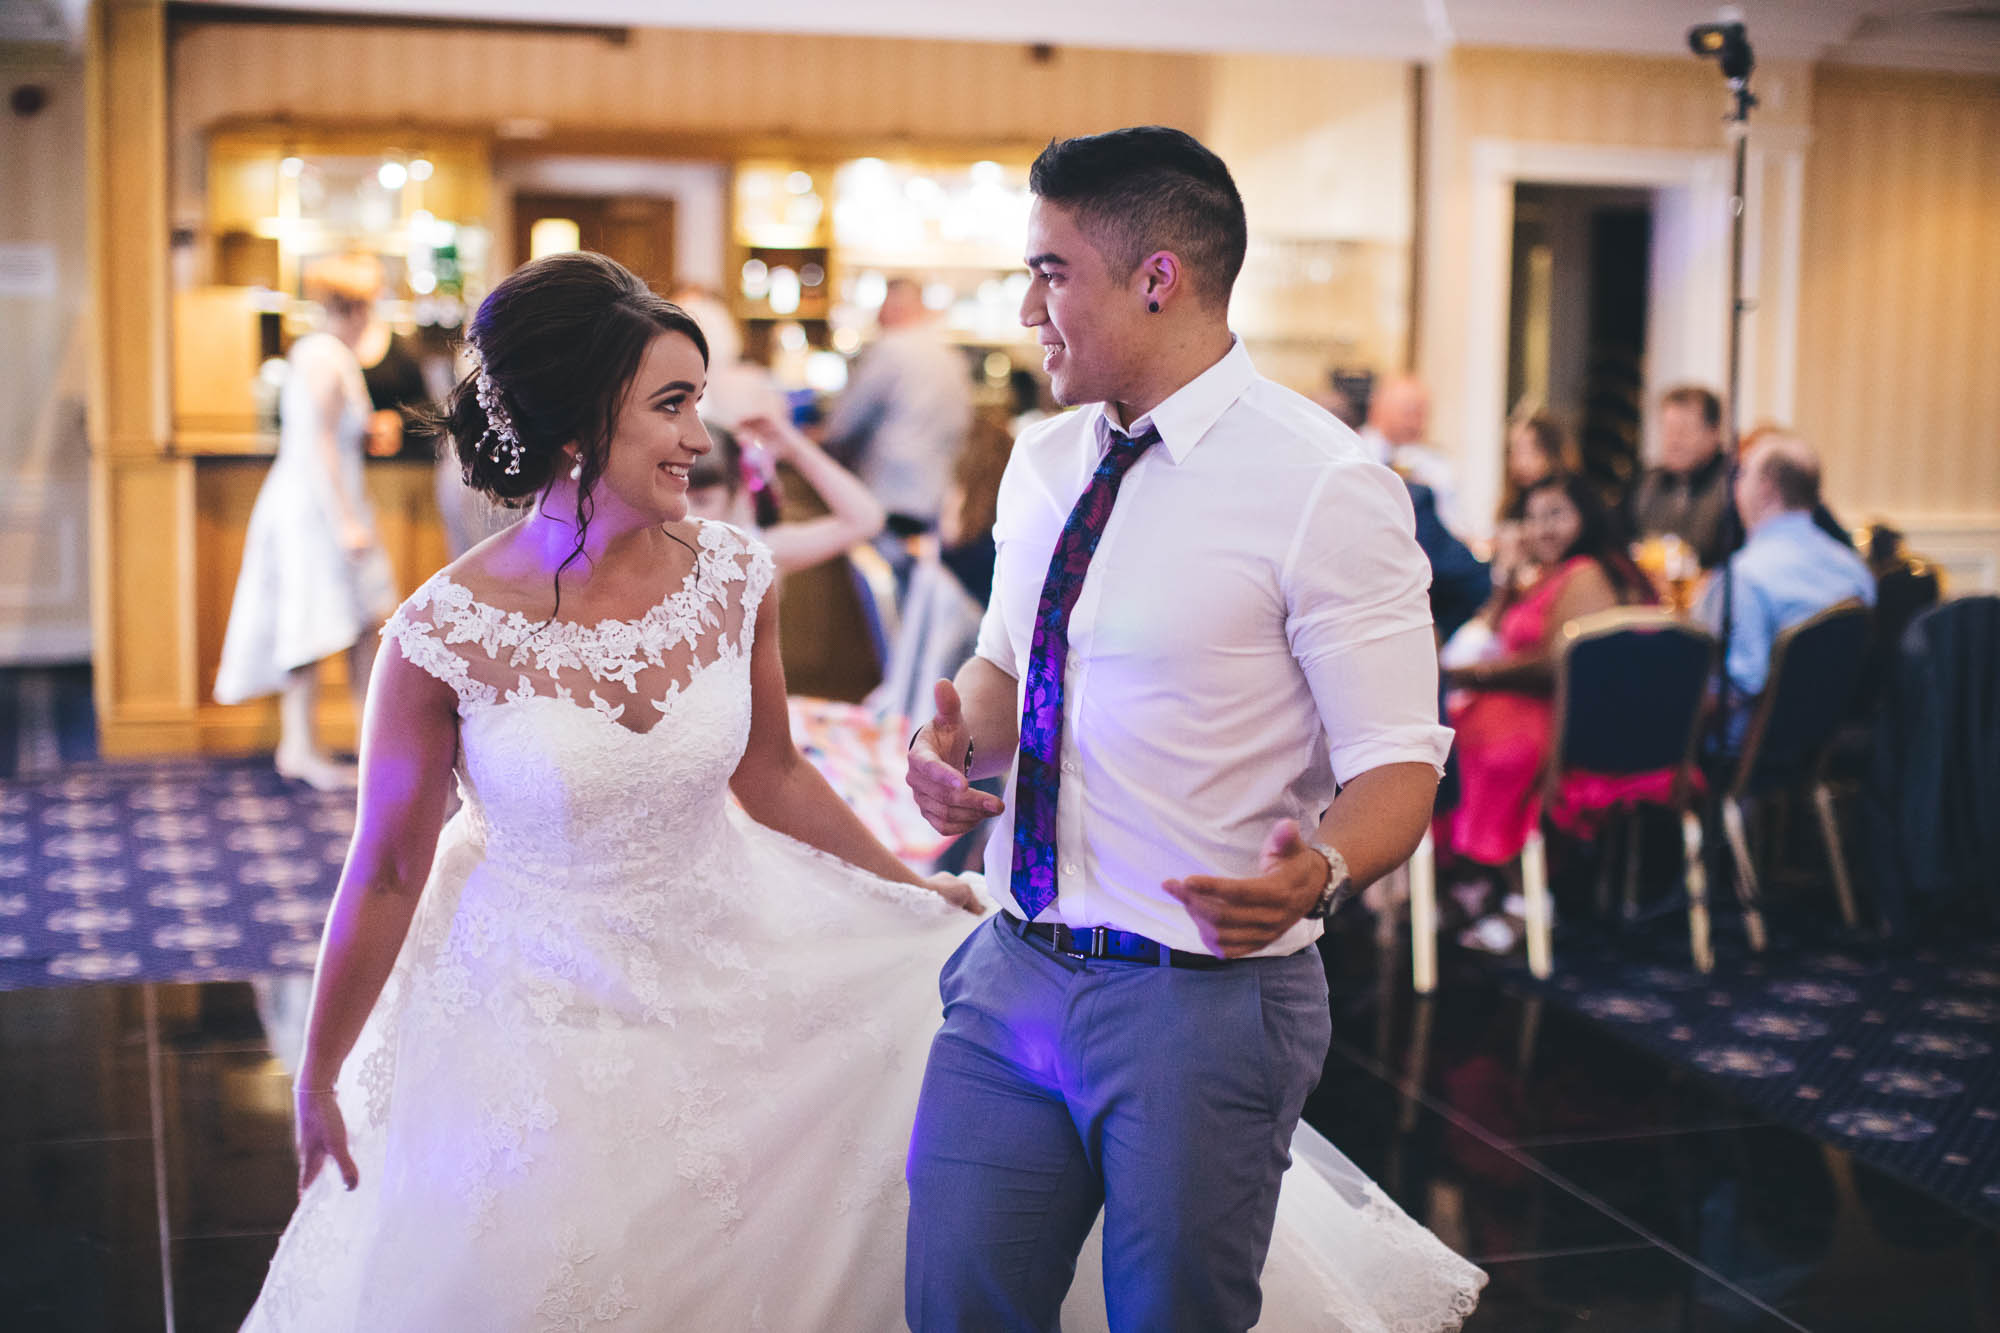 Bride and guest share a smile while they dance on the dance floor at wedding disco